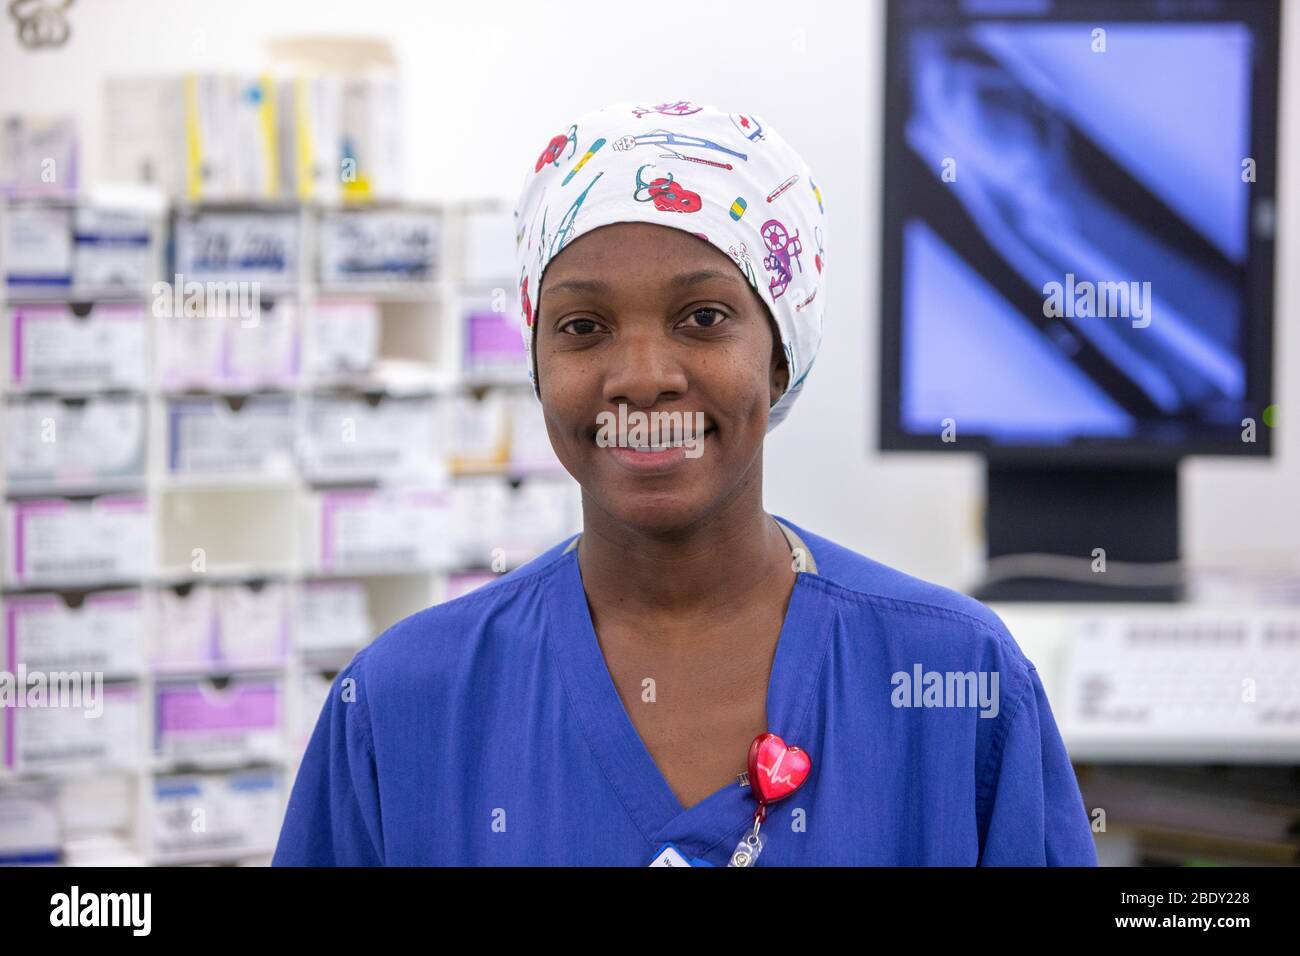 An NHS Nurse at an NHS hospital. The pressure has been growing on the NHS after the Coronavirus pandemic and the shortage of equipment and staff. Stock Photo